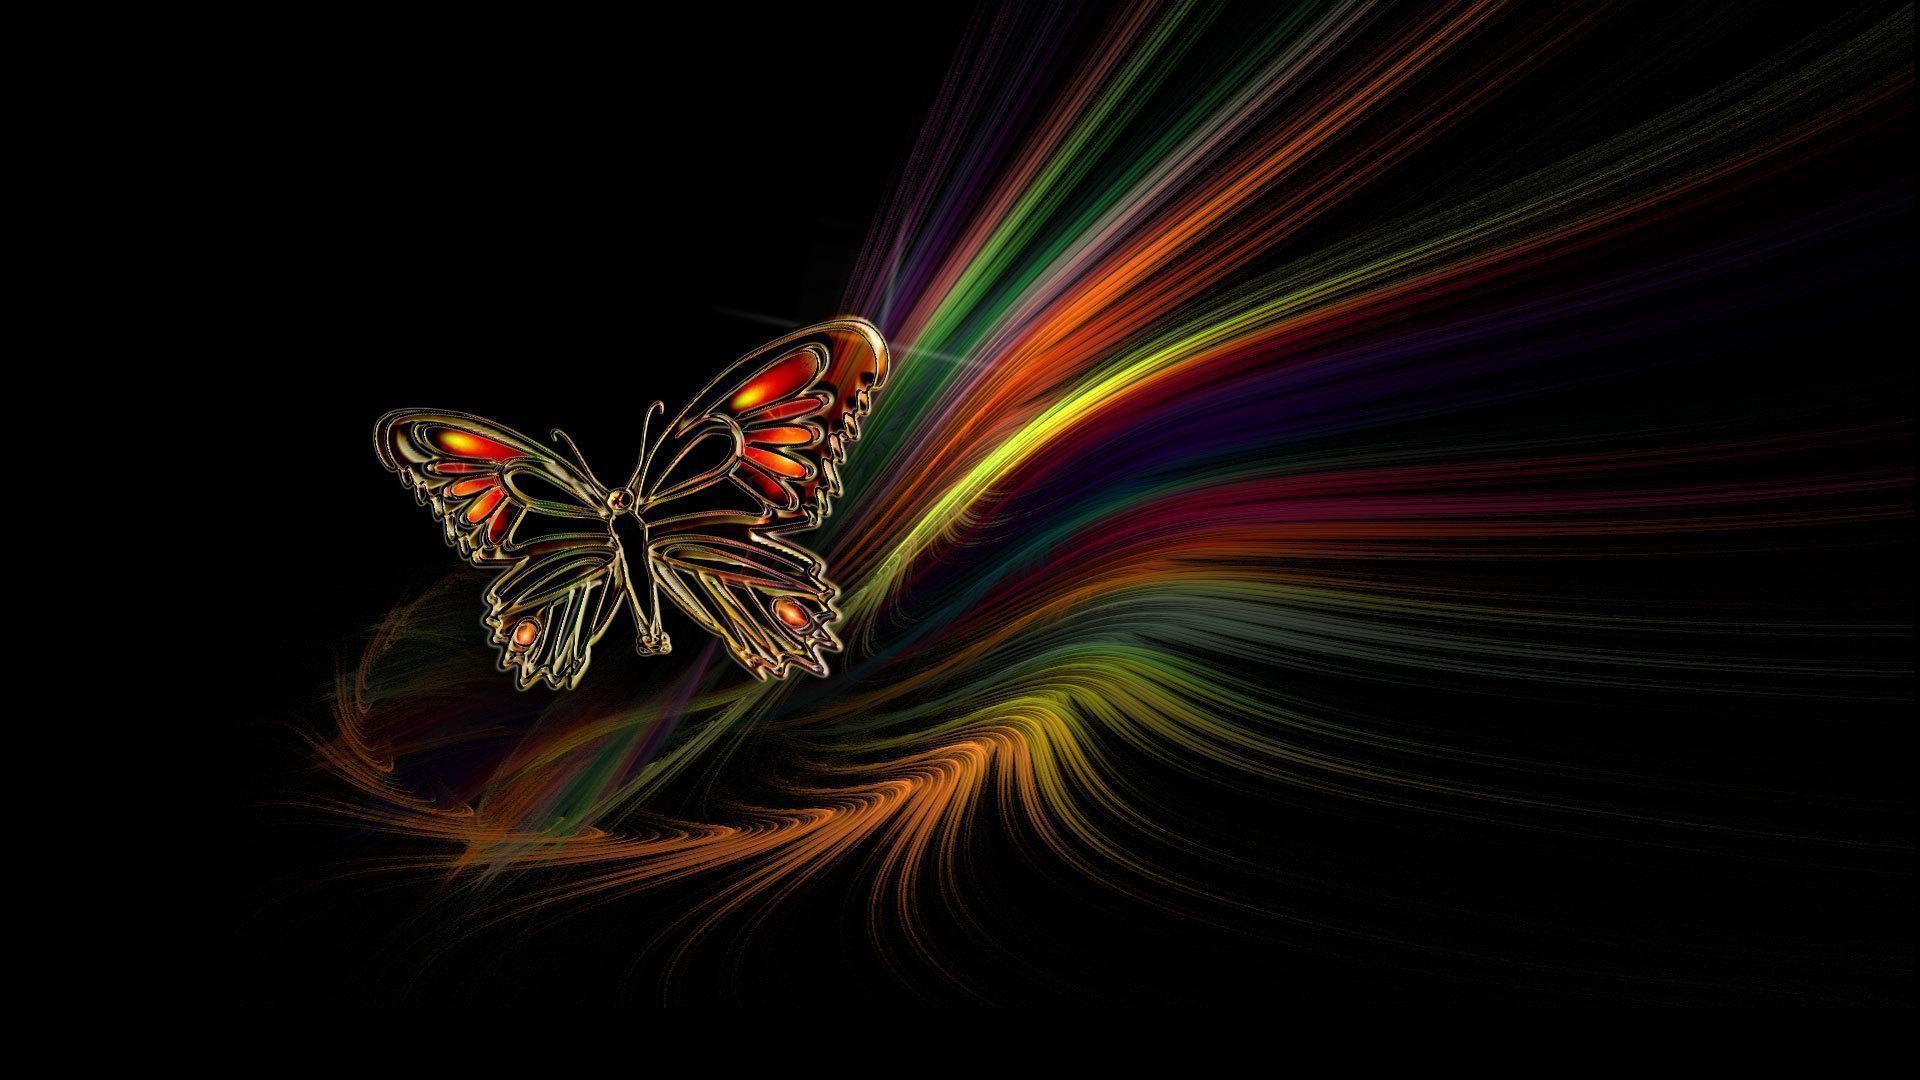 1920x1080 Wallpapers For > Black Butterfly Background Hd